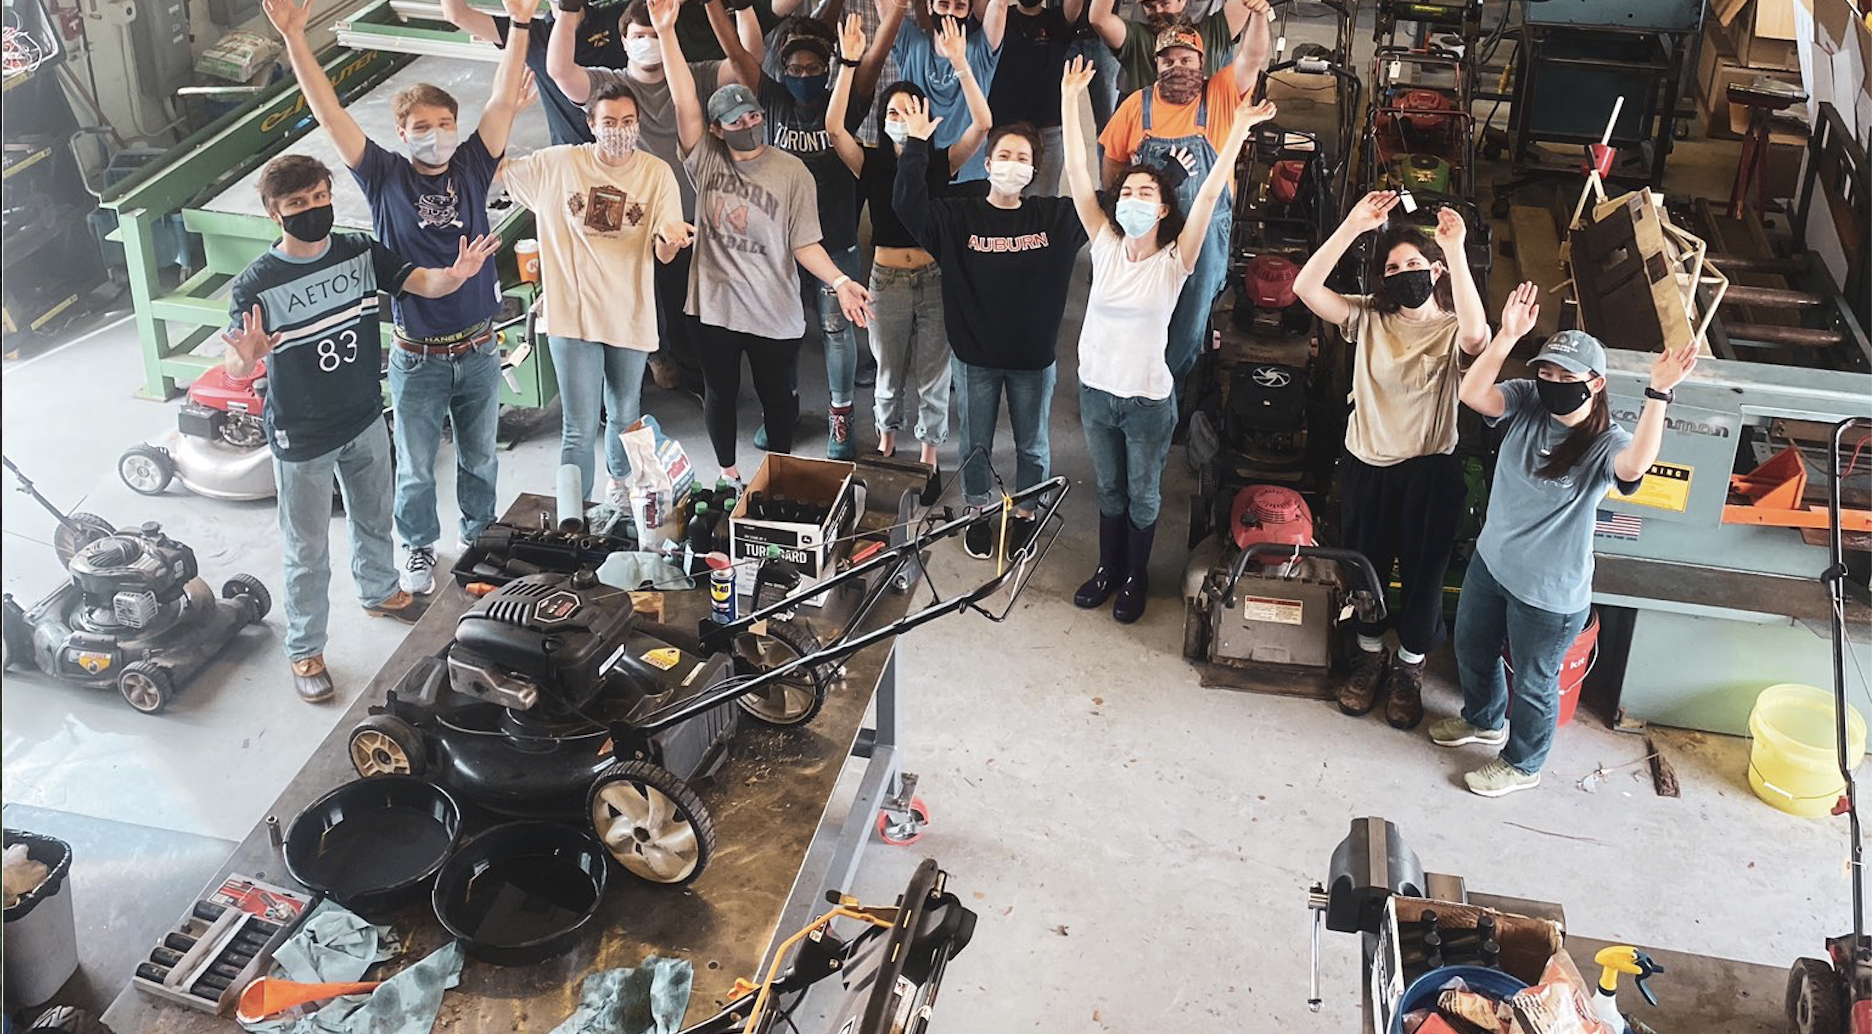 A group photo taken during last year's annual Lawnmower Clinic.